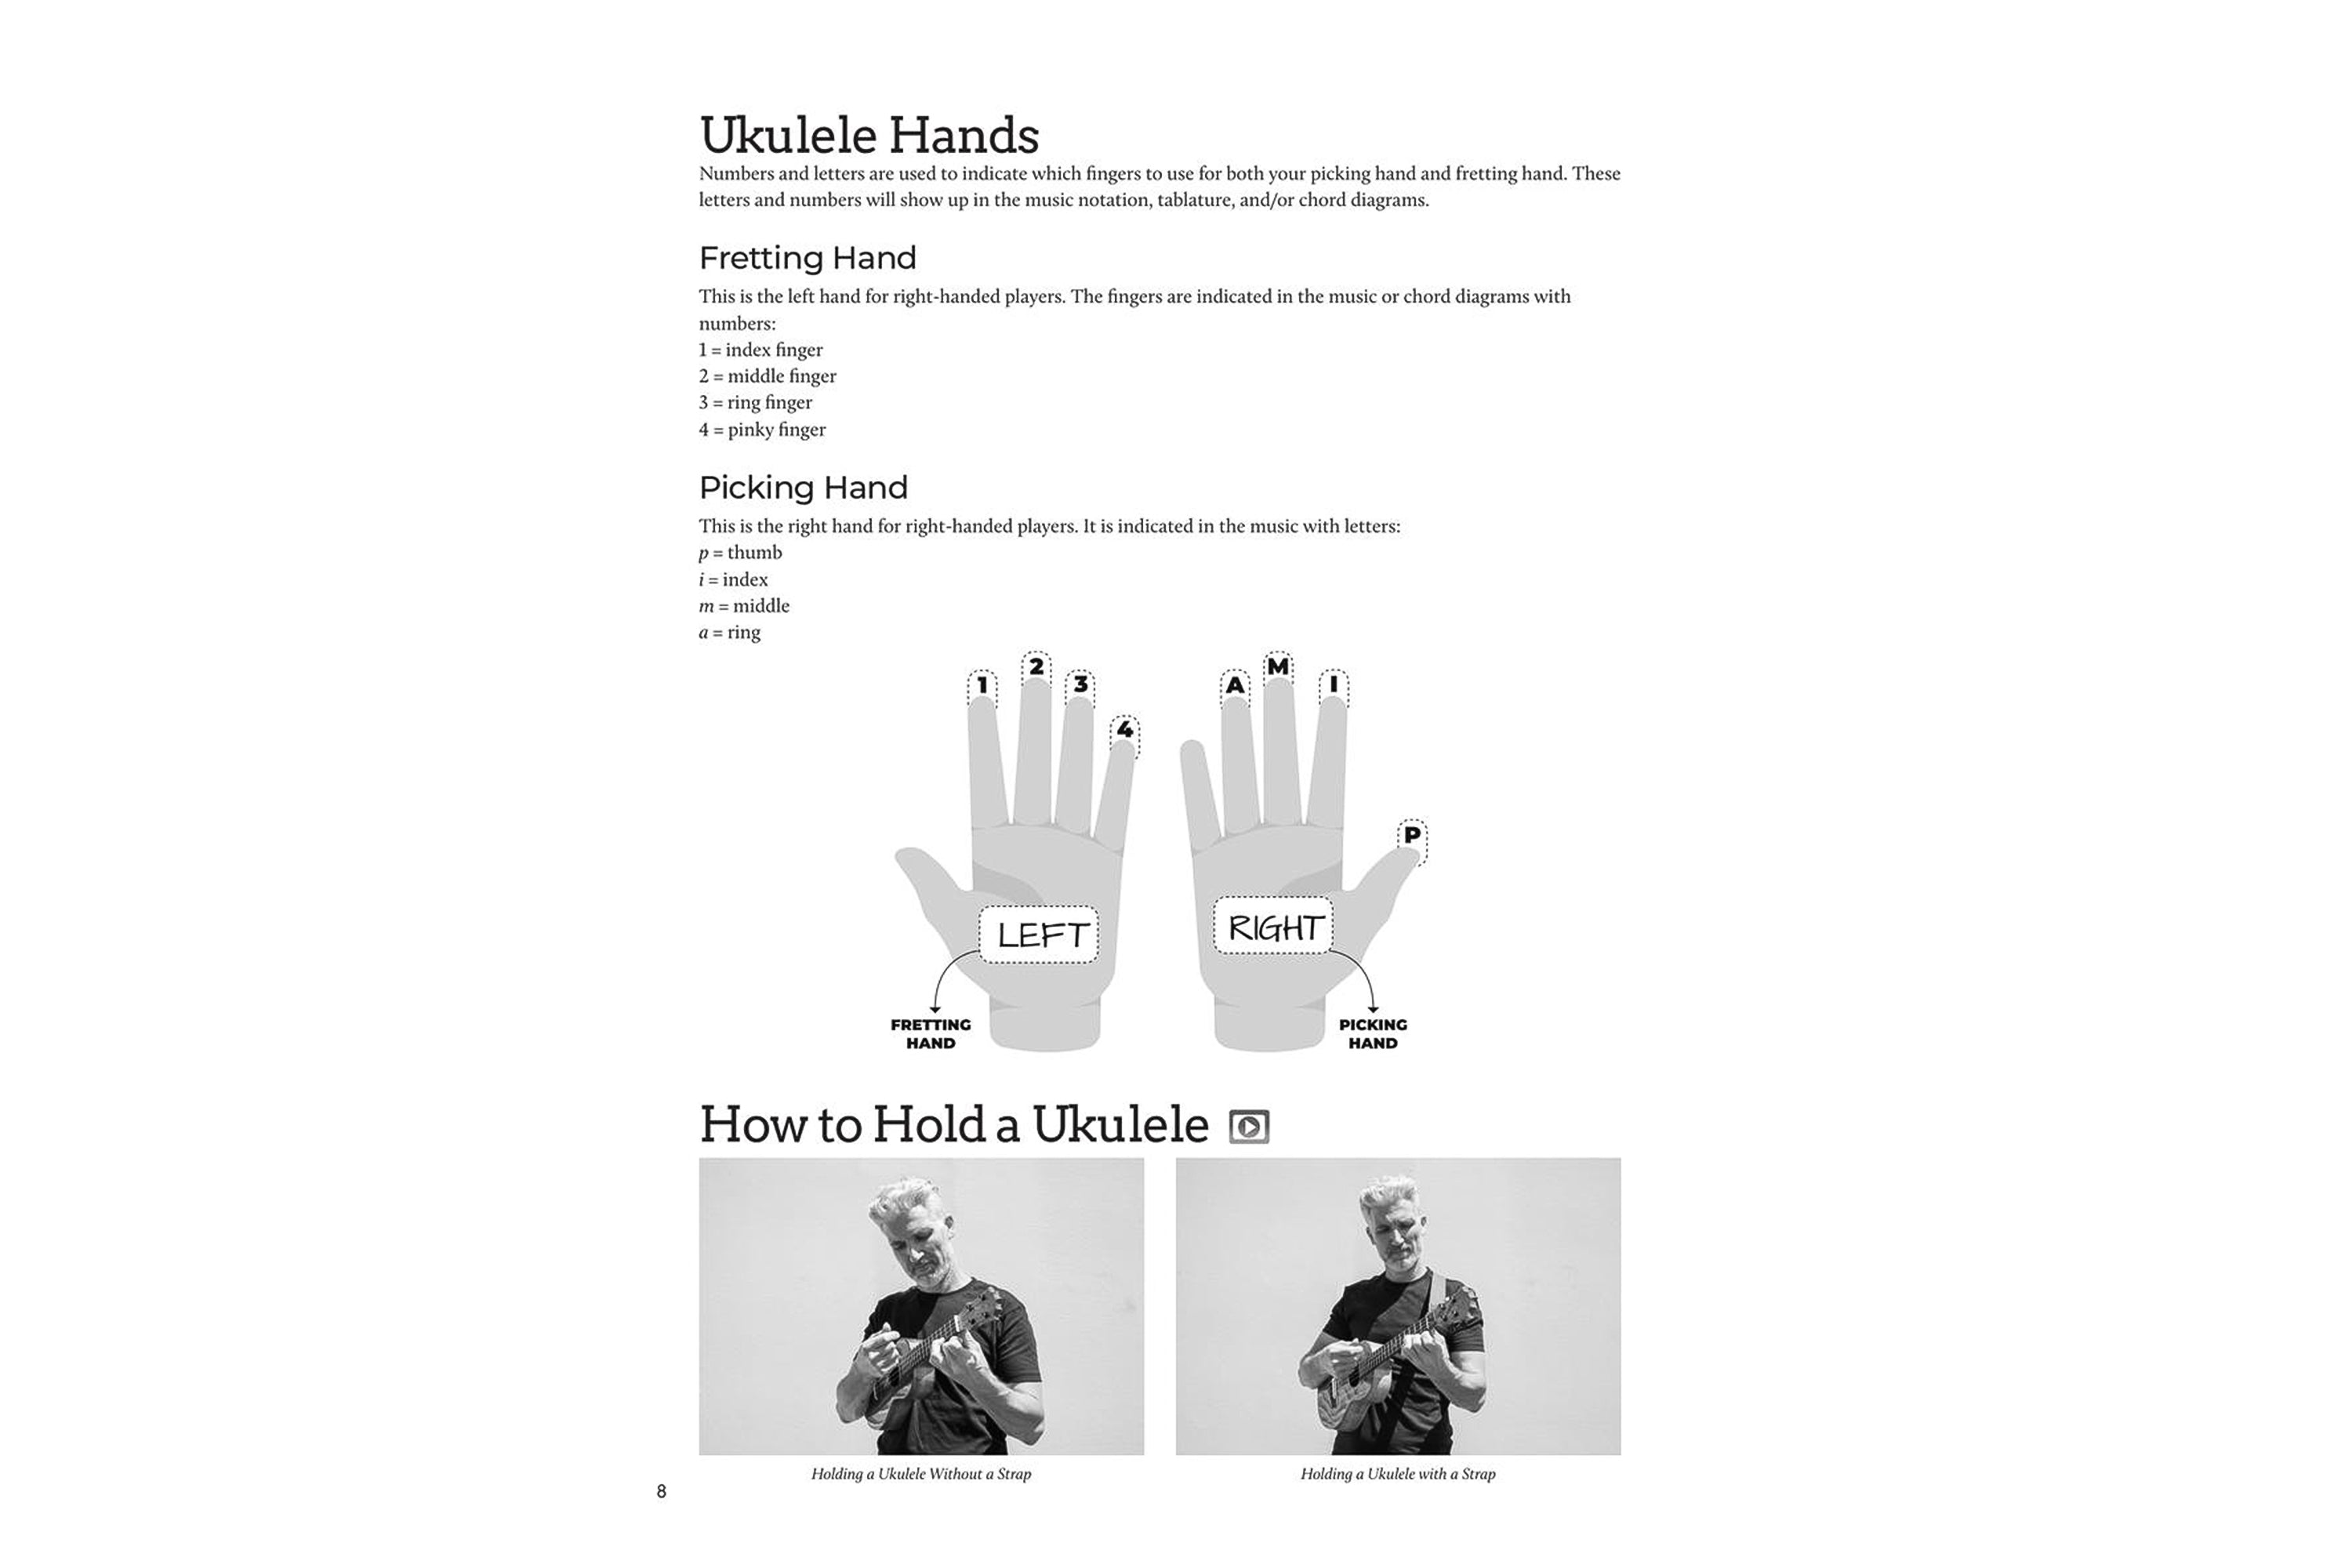 DO-IT-YOURSELF UKULELE The Best Step-by-Step Guide to Start Playing  for Soprano, Concert, or Tenor Ukulele